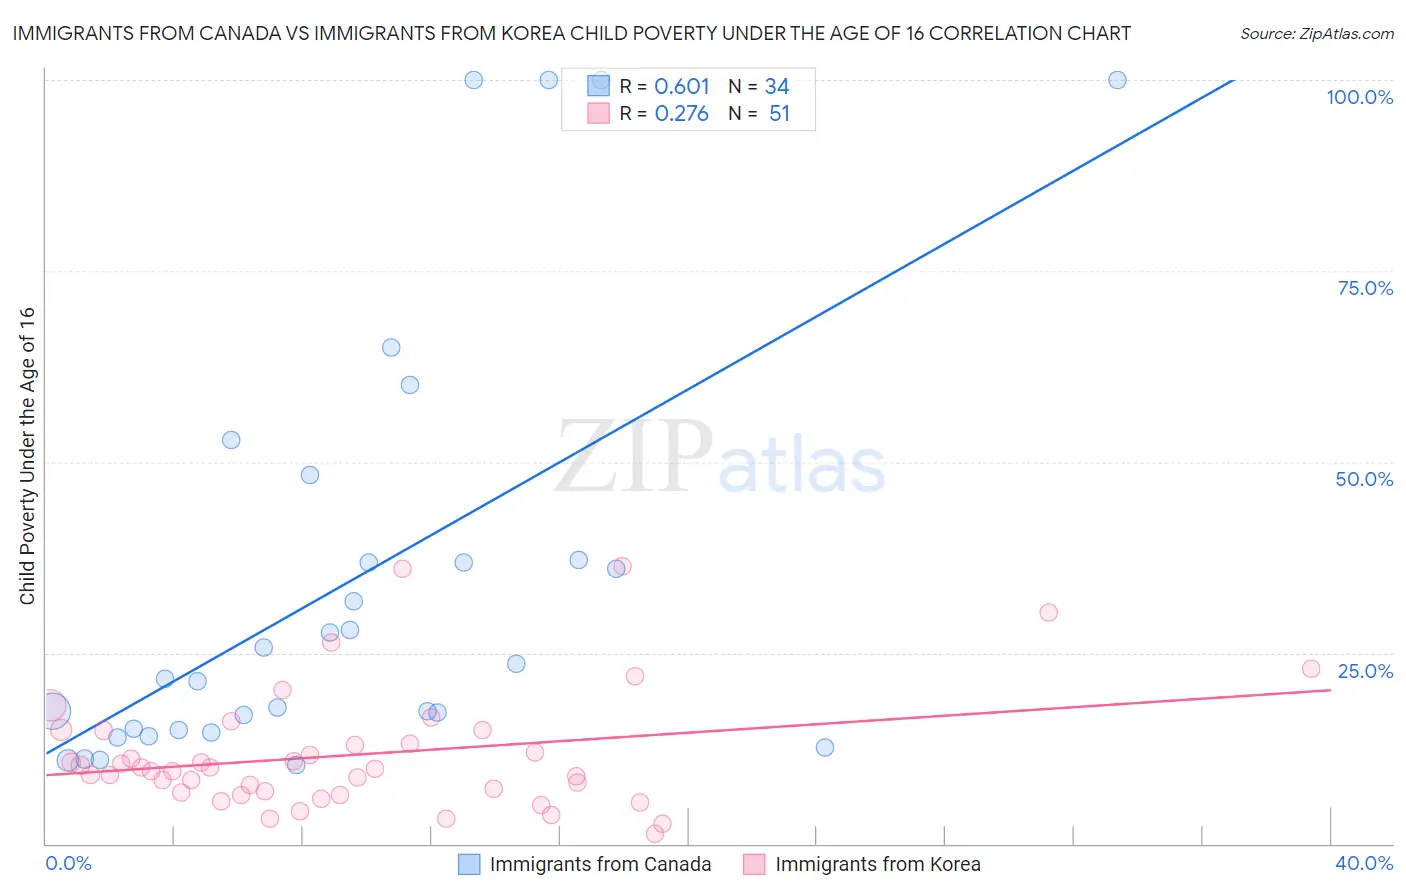 Immigrants from Canada vs Immigrants from Korea Child Poverty Under the Age of 16